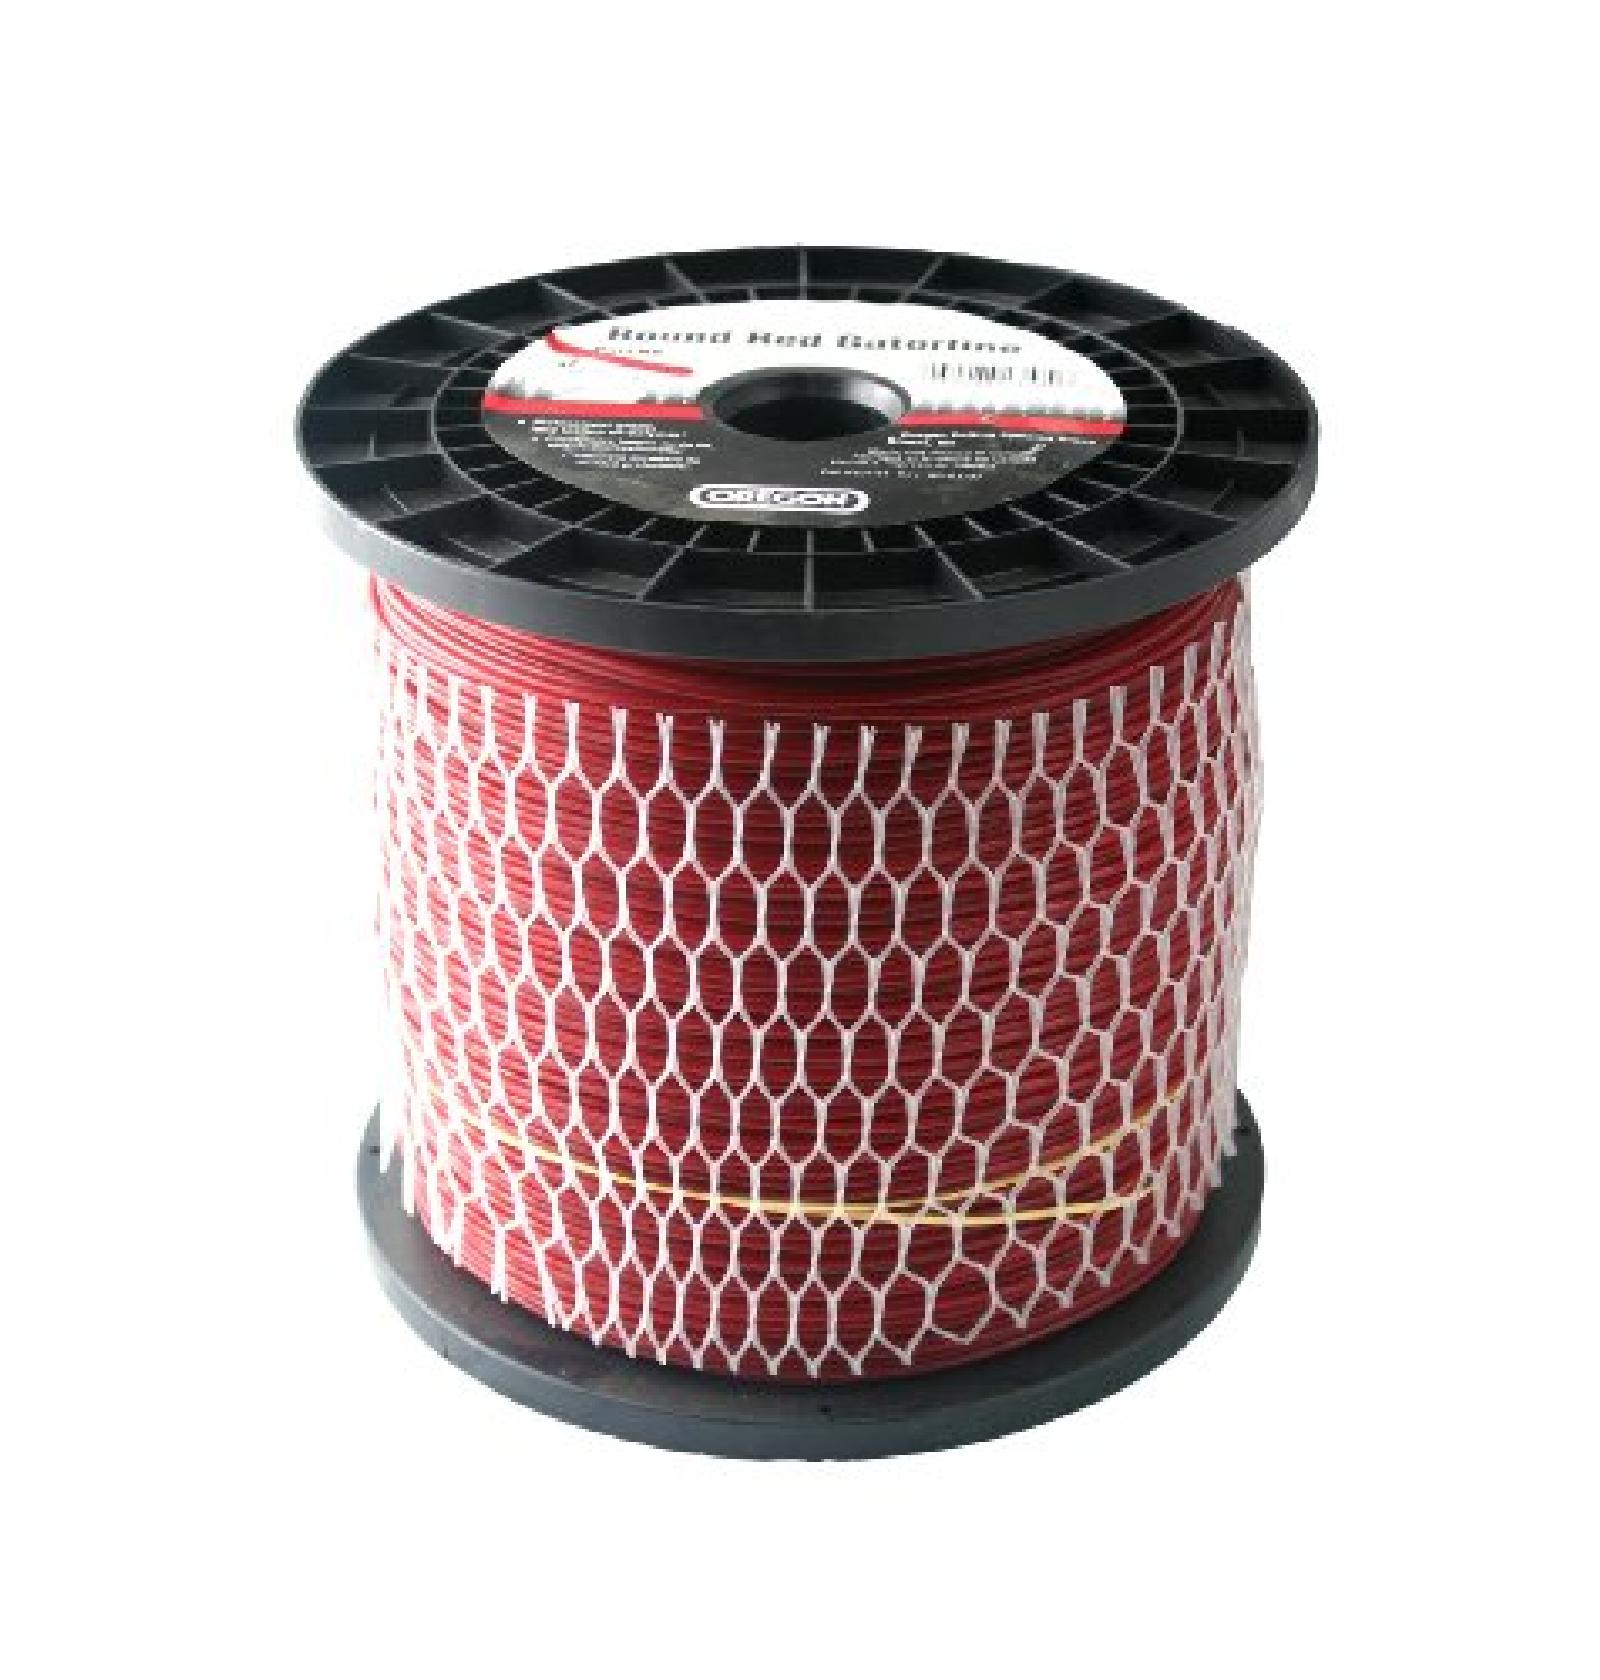 GATORLINE, ROUND RED .080 part# 23-180 by Oregon - Click Image to Close